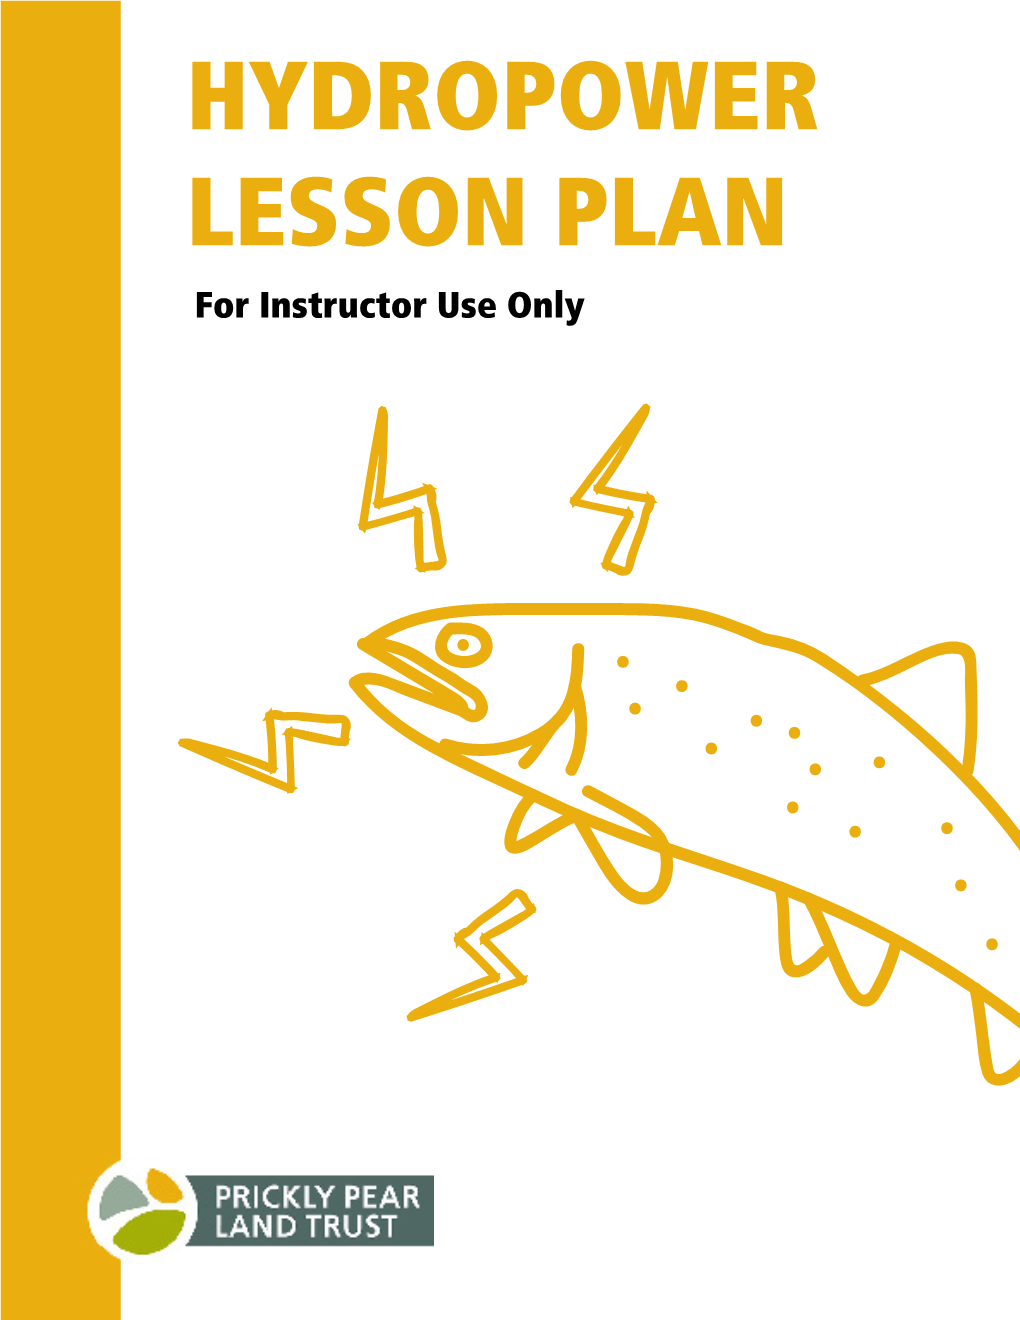 HYDROPOWER LESSON PLAN for Instructor Use Only Hydropower